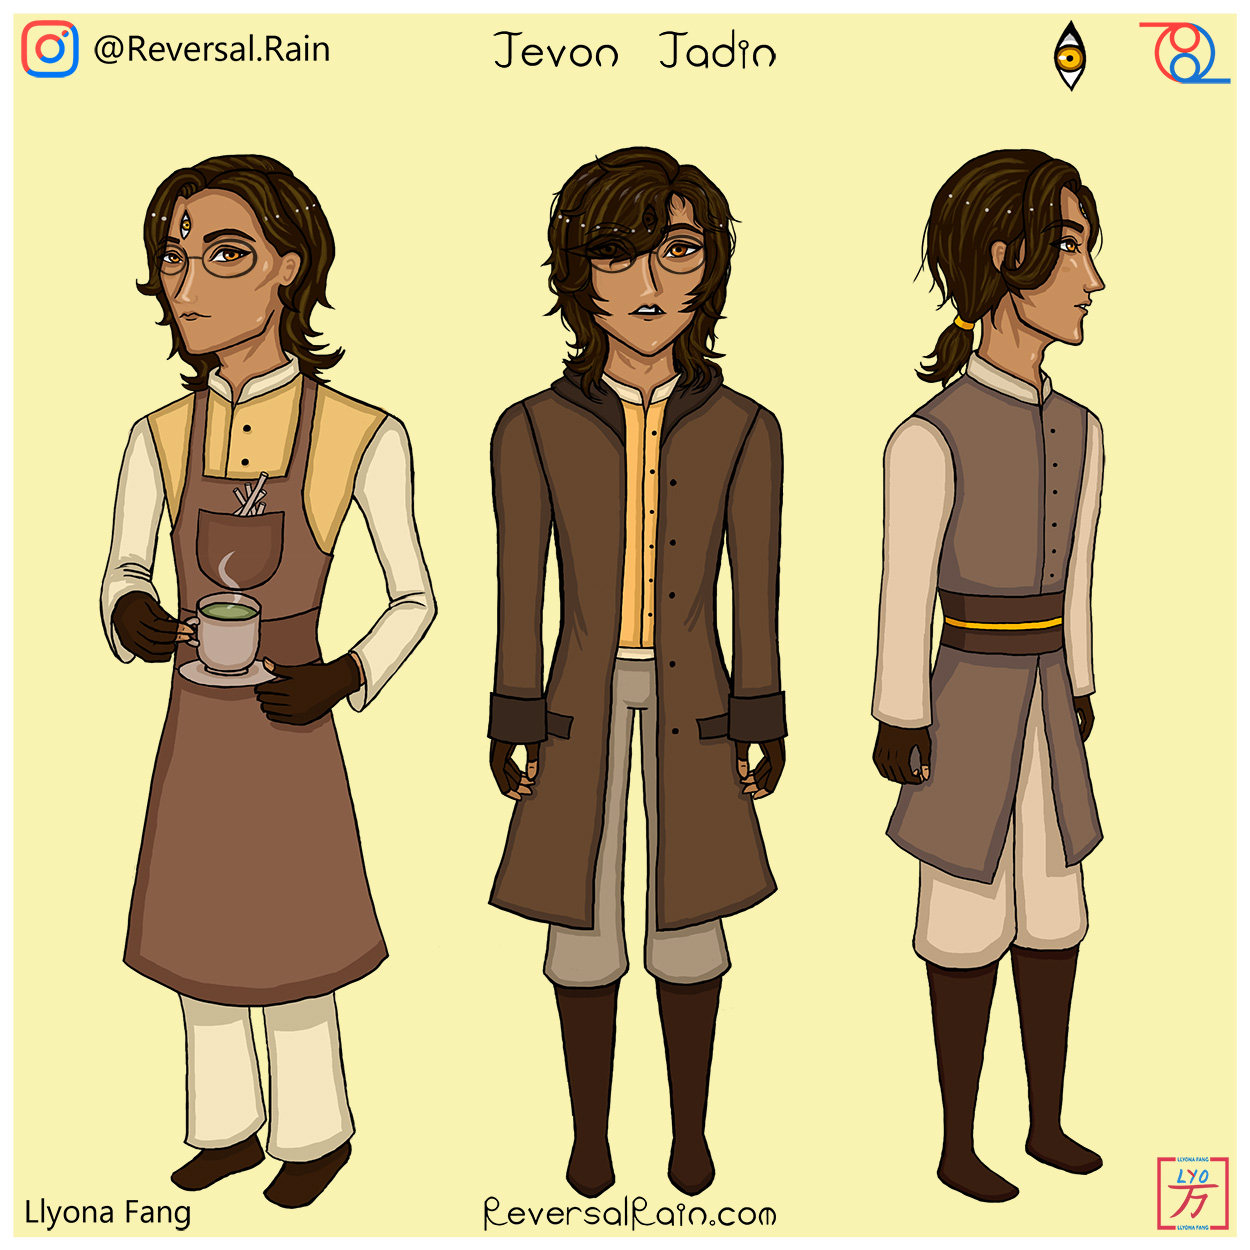 <p><h4>💛⏳Jevon Jadin⏳💛</h4></p>
       <p>A barista, musician, and aspiring physicist!</p>
        <p>🎶 Instrument: Guitar</p>
          <p>The son of employee at The Queen Been spends his nights dreaming of the shattered space beyond the sky. He knows
            that humanity's soaring mechanical beasts probably wouldn't be reinvented during his lifetime, but that won't thwart him from
            pursuing the physical sciences. You might find him in the grand clocktower after his barista shift, making repairs under the
            apprenticeship of the village mechanic, Mr. Jiayin. Running a cafe with his single mother proves to be quite exhausting, so
            listen carefully during the long evenings for the perfectly timed strumming and percussive strikes of his guitar strings as
            he releases his tension through gloved fingers. Weary of his third eye, some treated him as an outcast in his youth, but it's
            assured that he bears no ill omen.<p><p>
            <p>» <i>Click to exit description!</i> «</p></p>
          